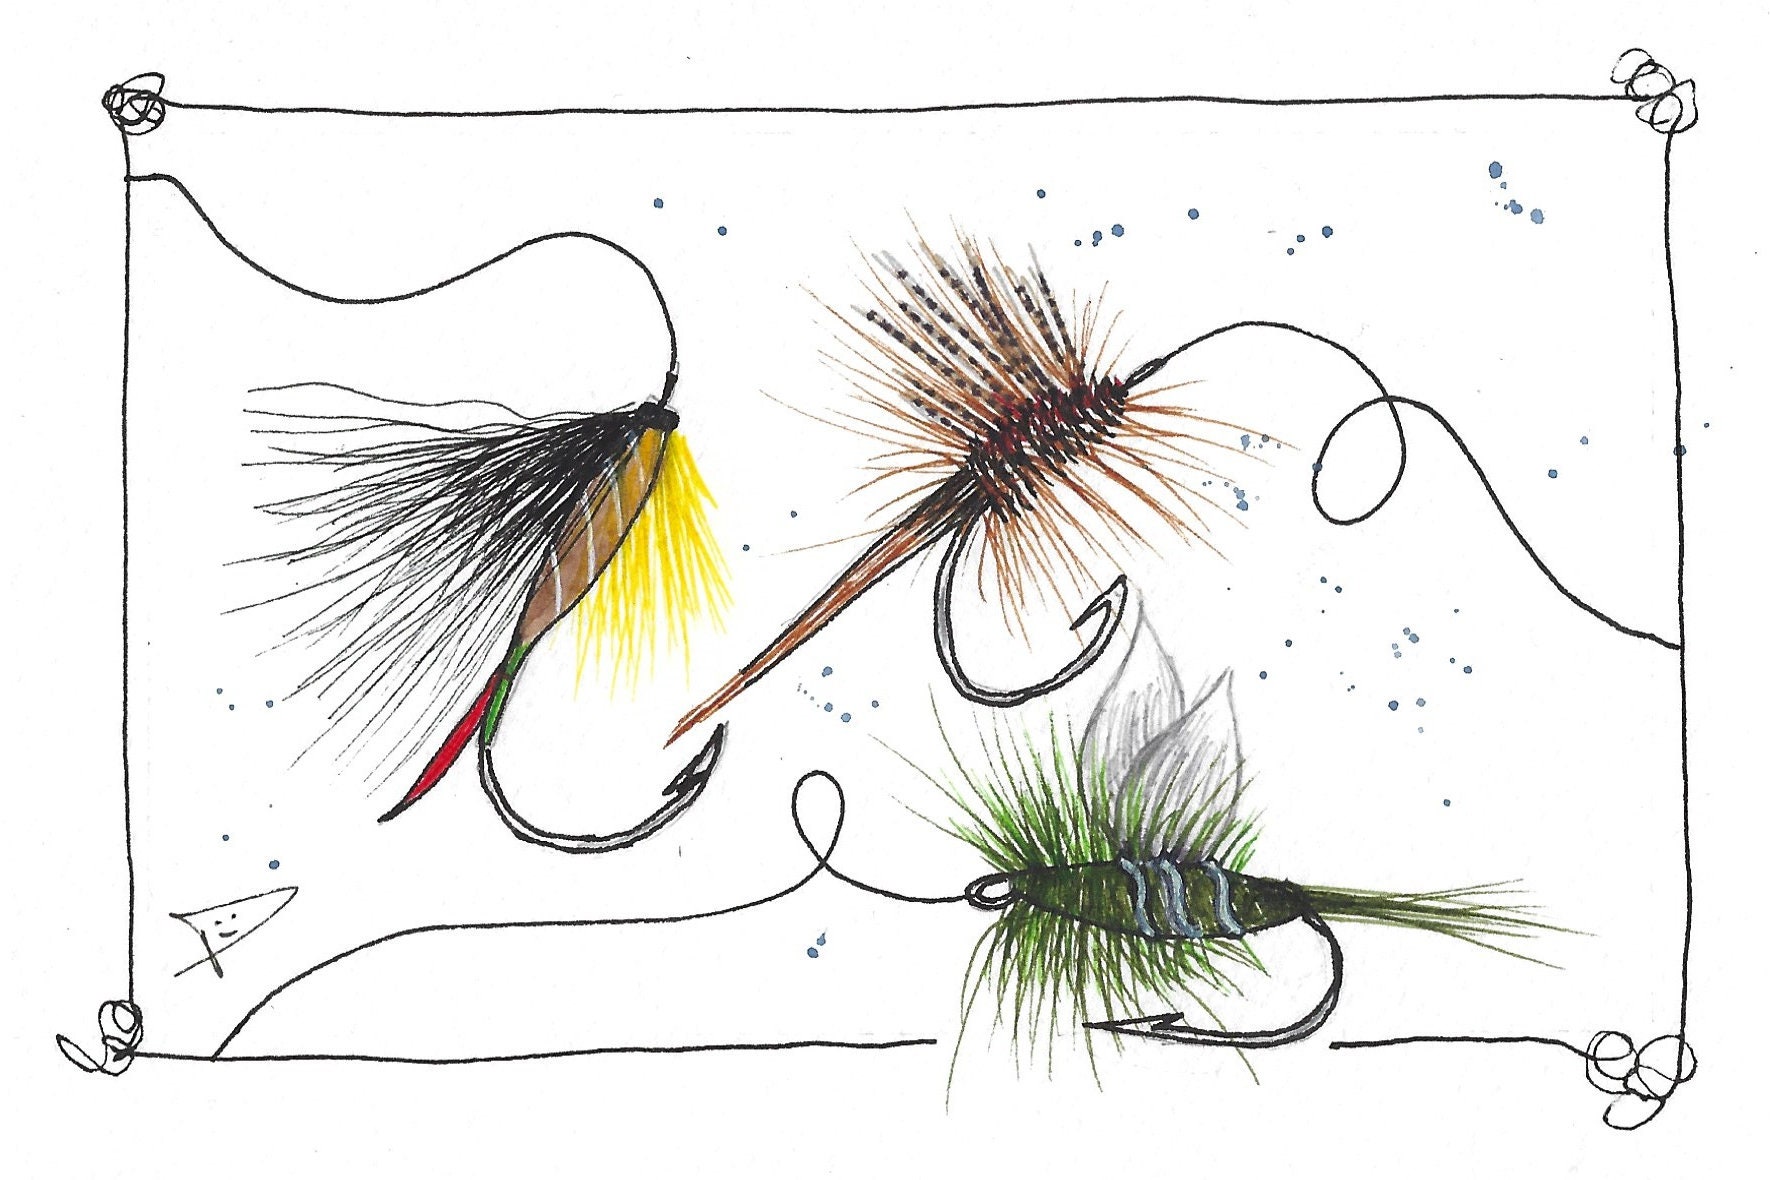 Fly Fishing Lures Artwork Illustrated Art Postcards, Fish Bait Art, Greeting  Cards, Gift for Fisherman, Outdoors Naturalist, Fly Fishing -  Canada